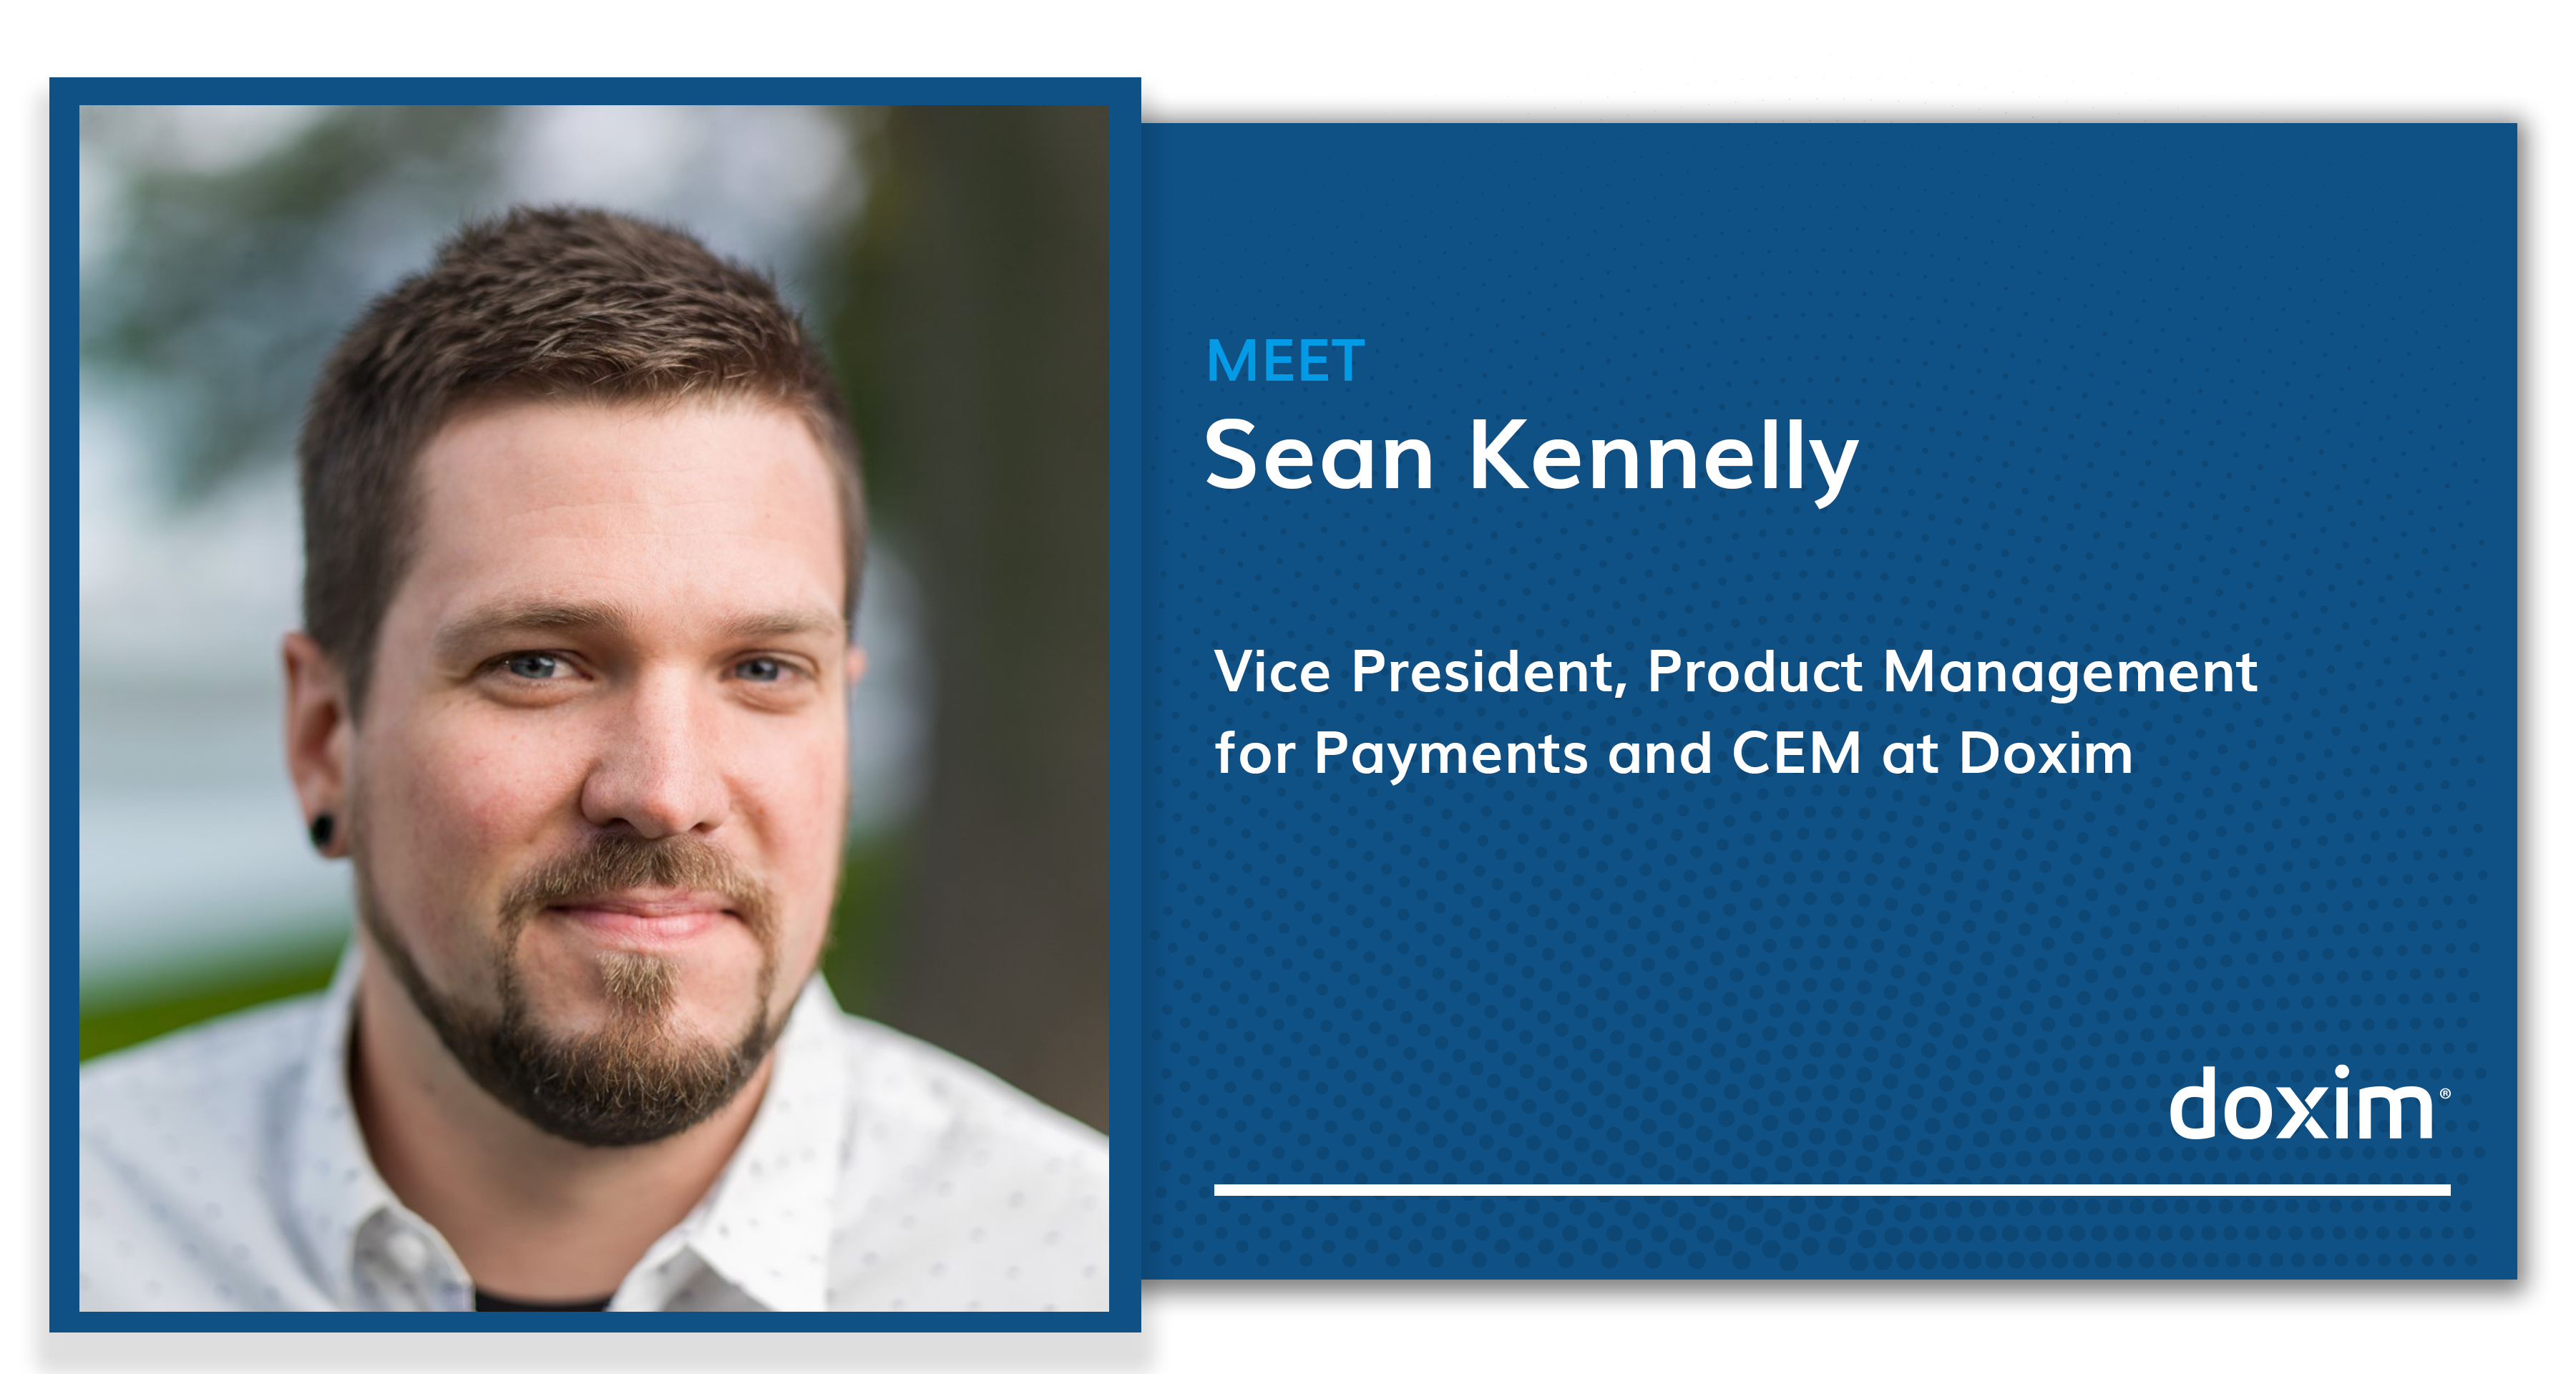 Sean Kennelly, Vice President, Product Management for Payments and CEM at Doxim